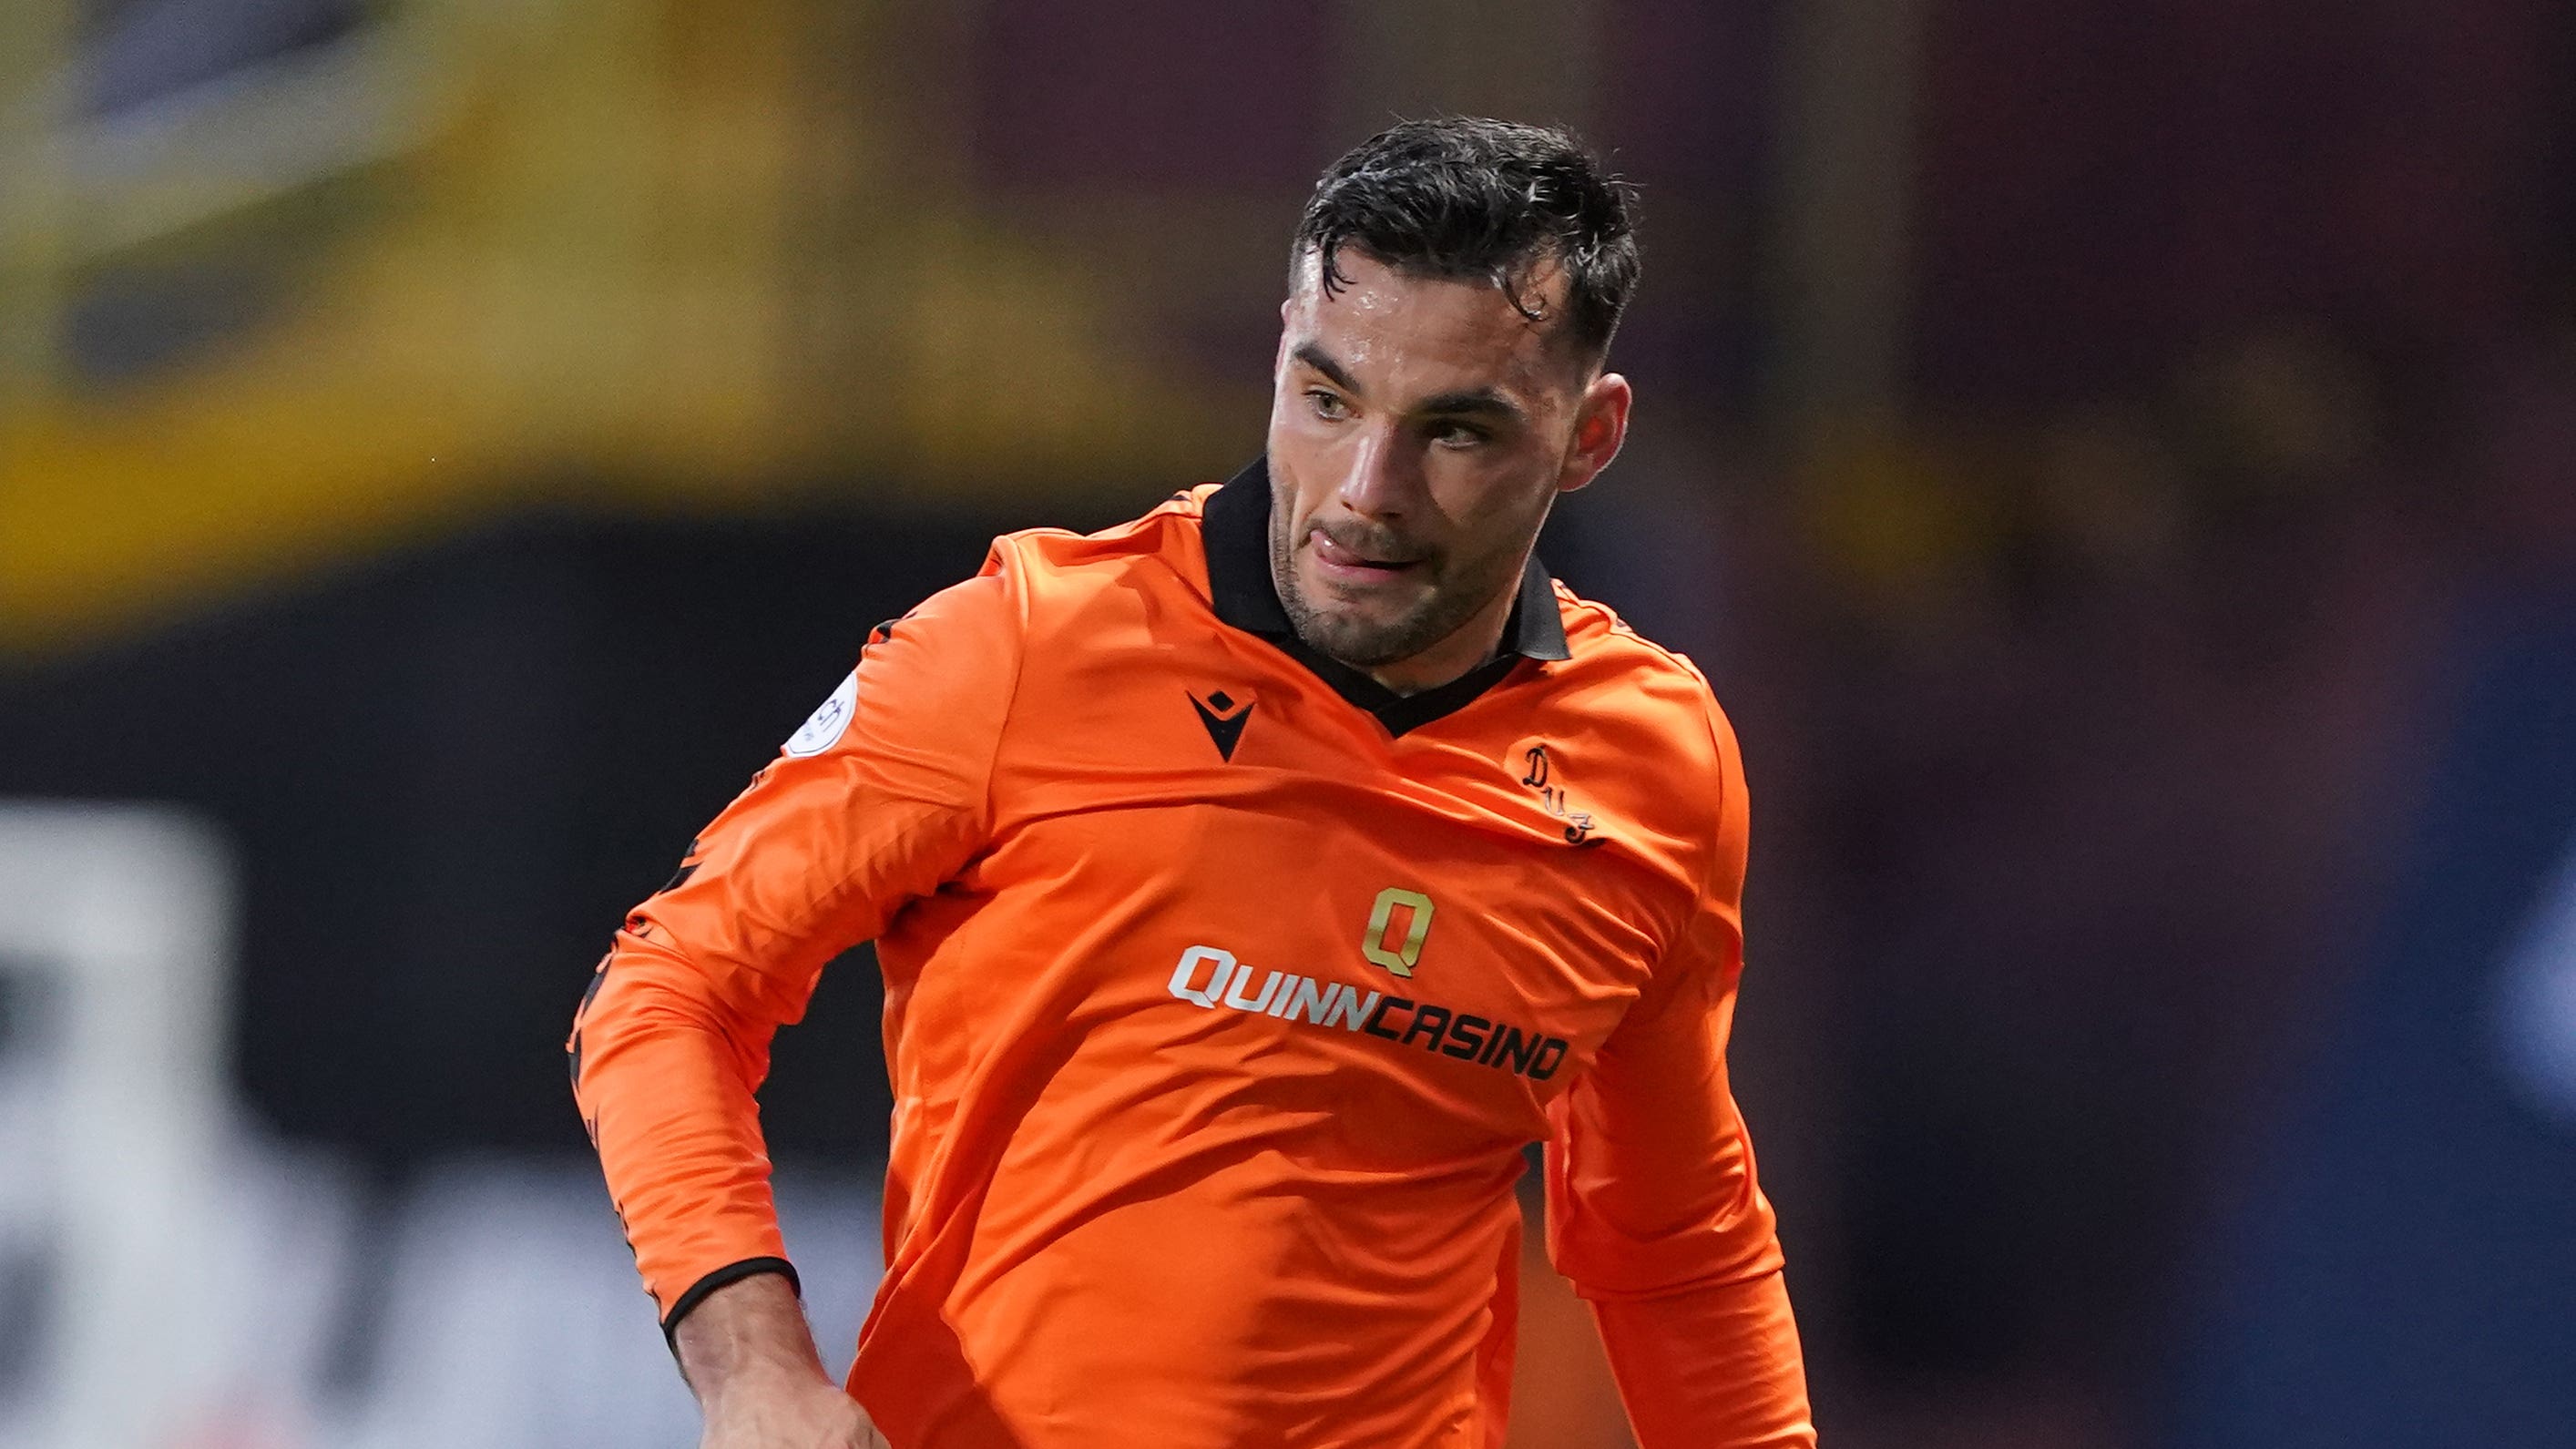 Dundee United go top as late Tony Watt goal earns victory at Inverness